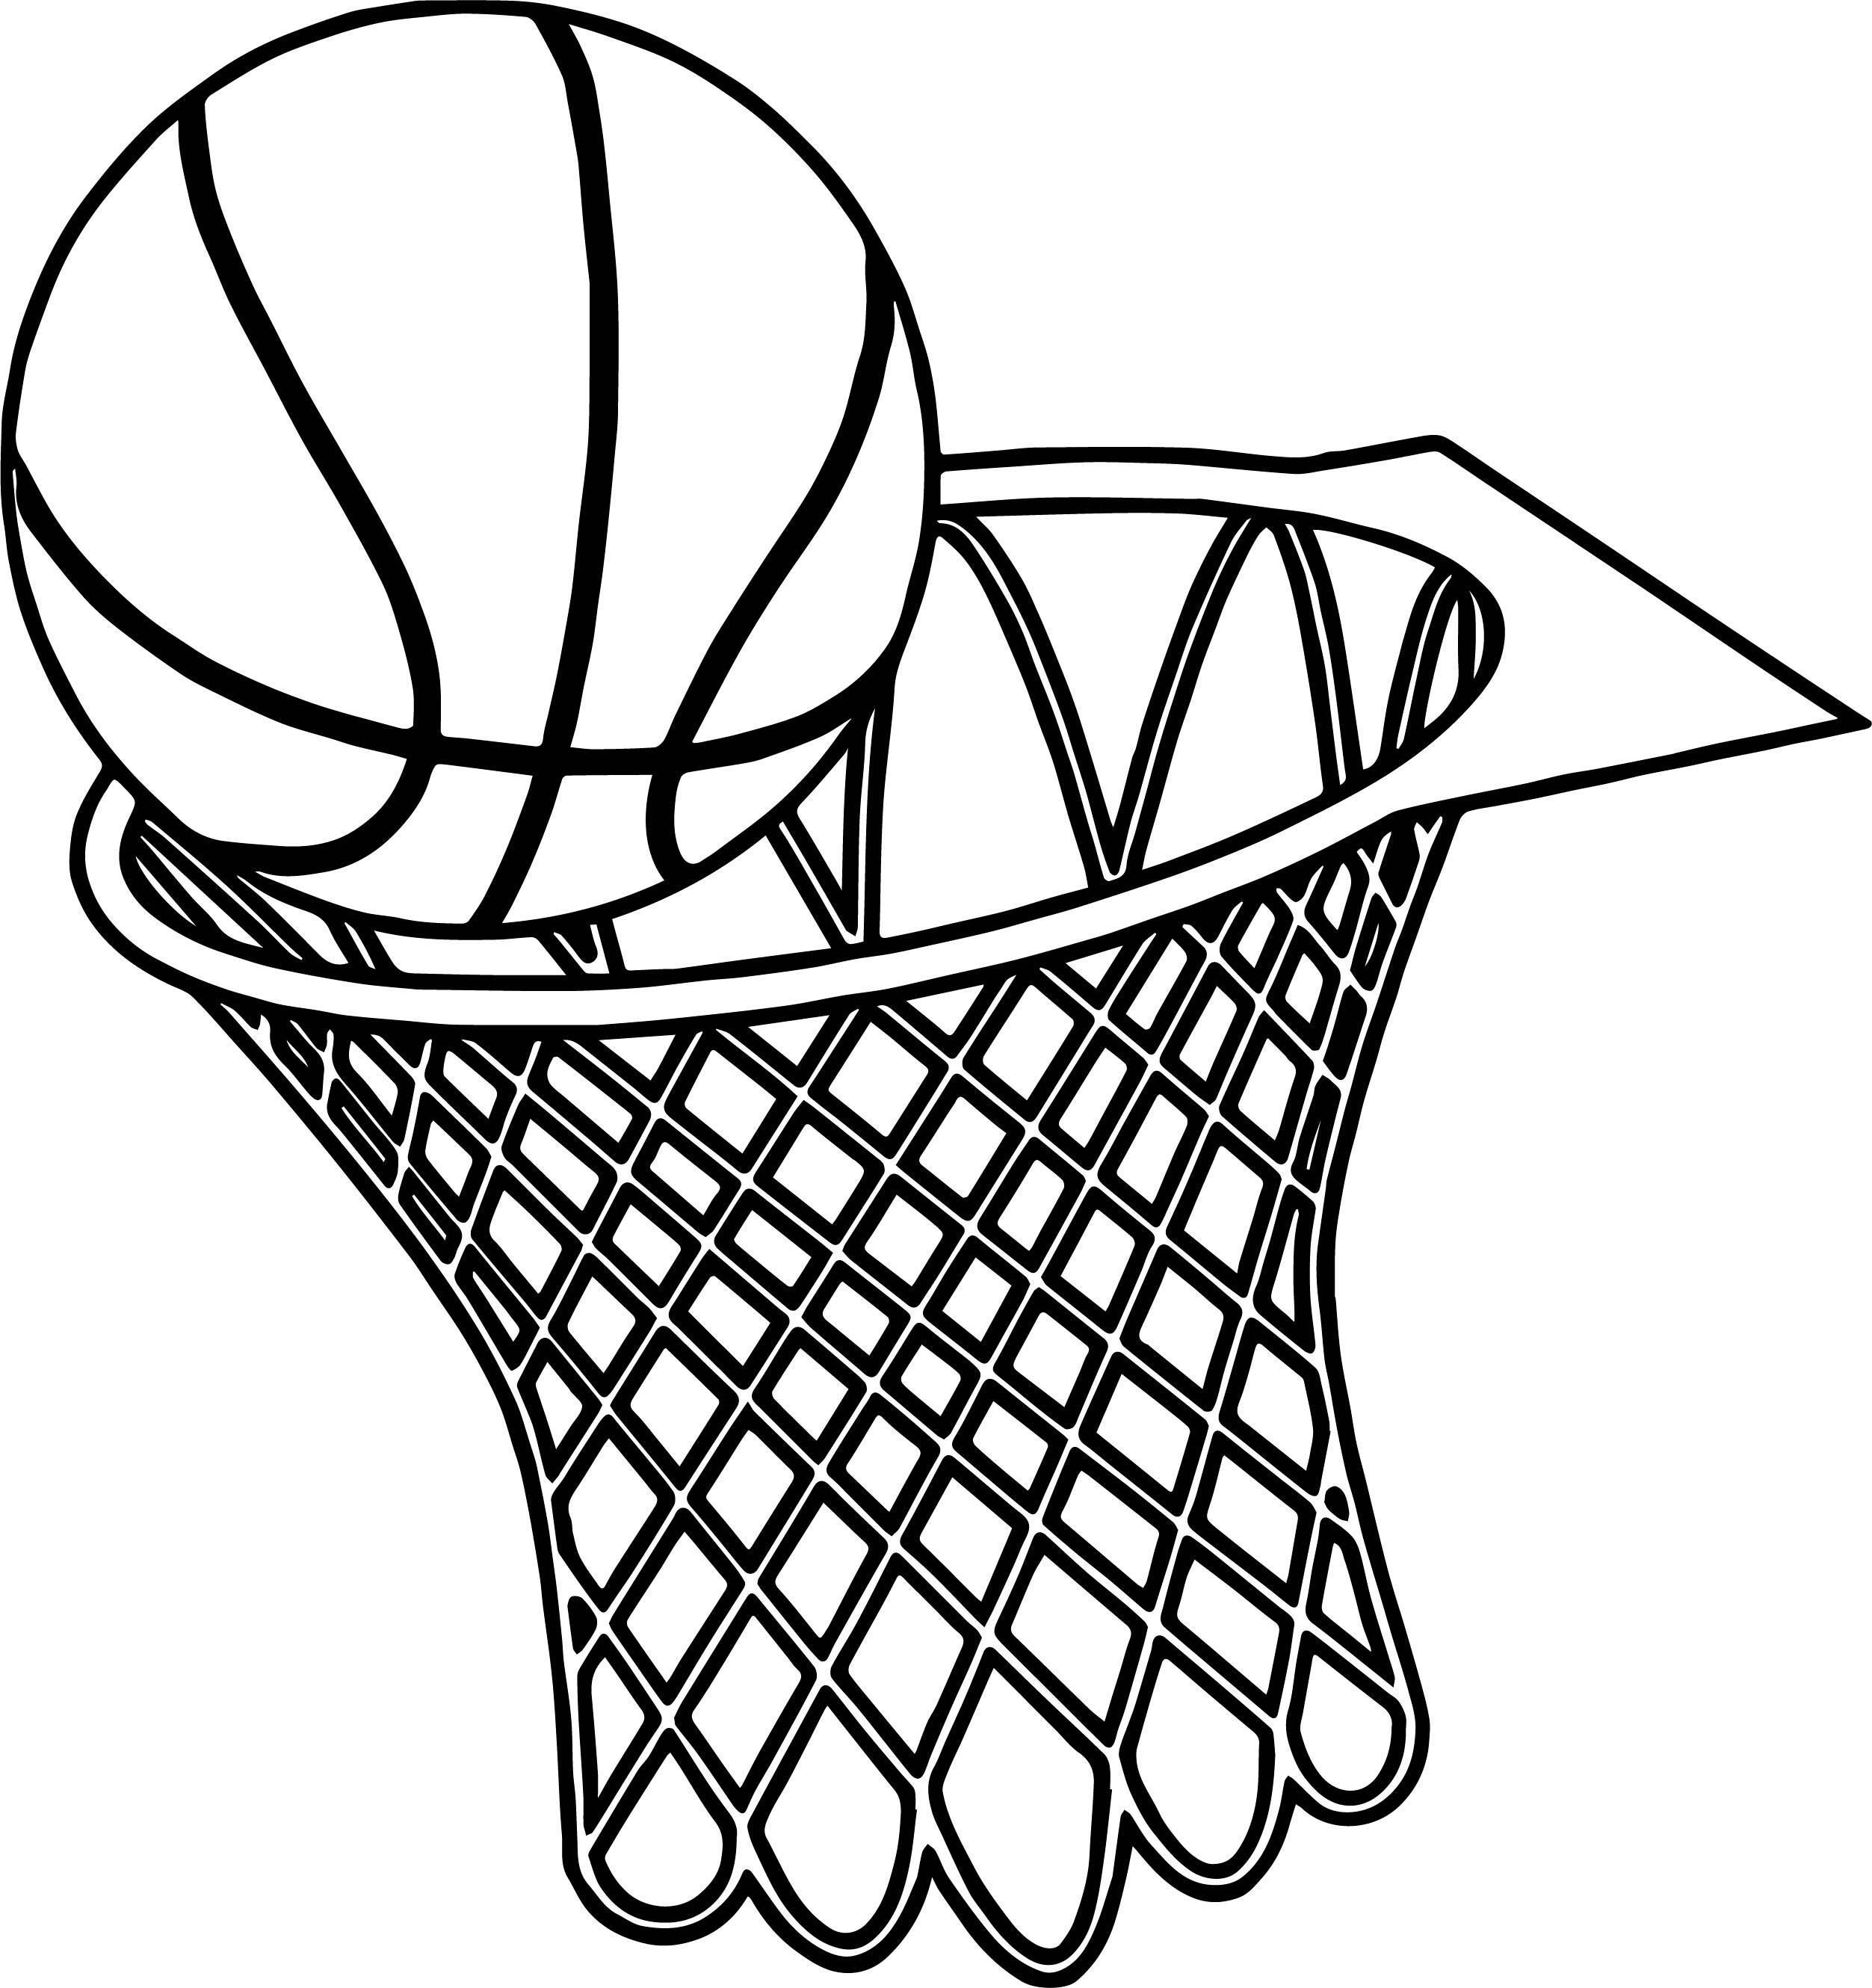 Basketball Goal Coloring Pages at GetColorings.com | Free printable ...